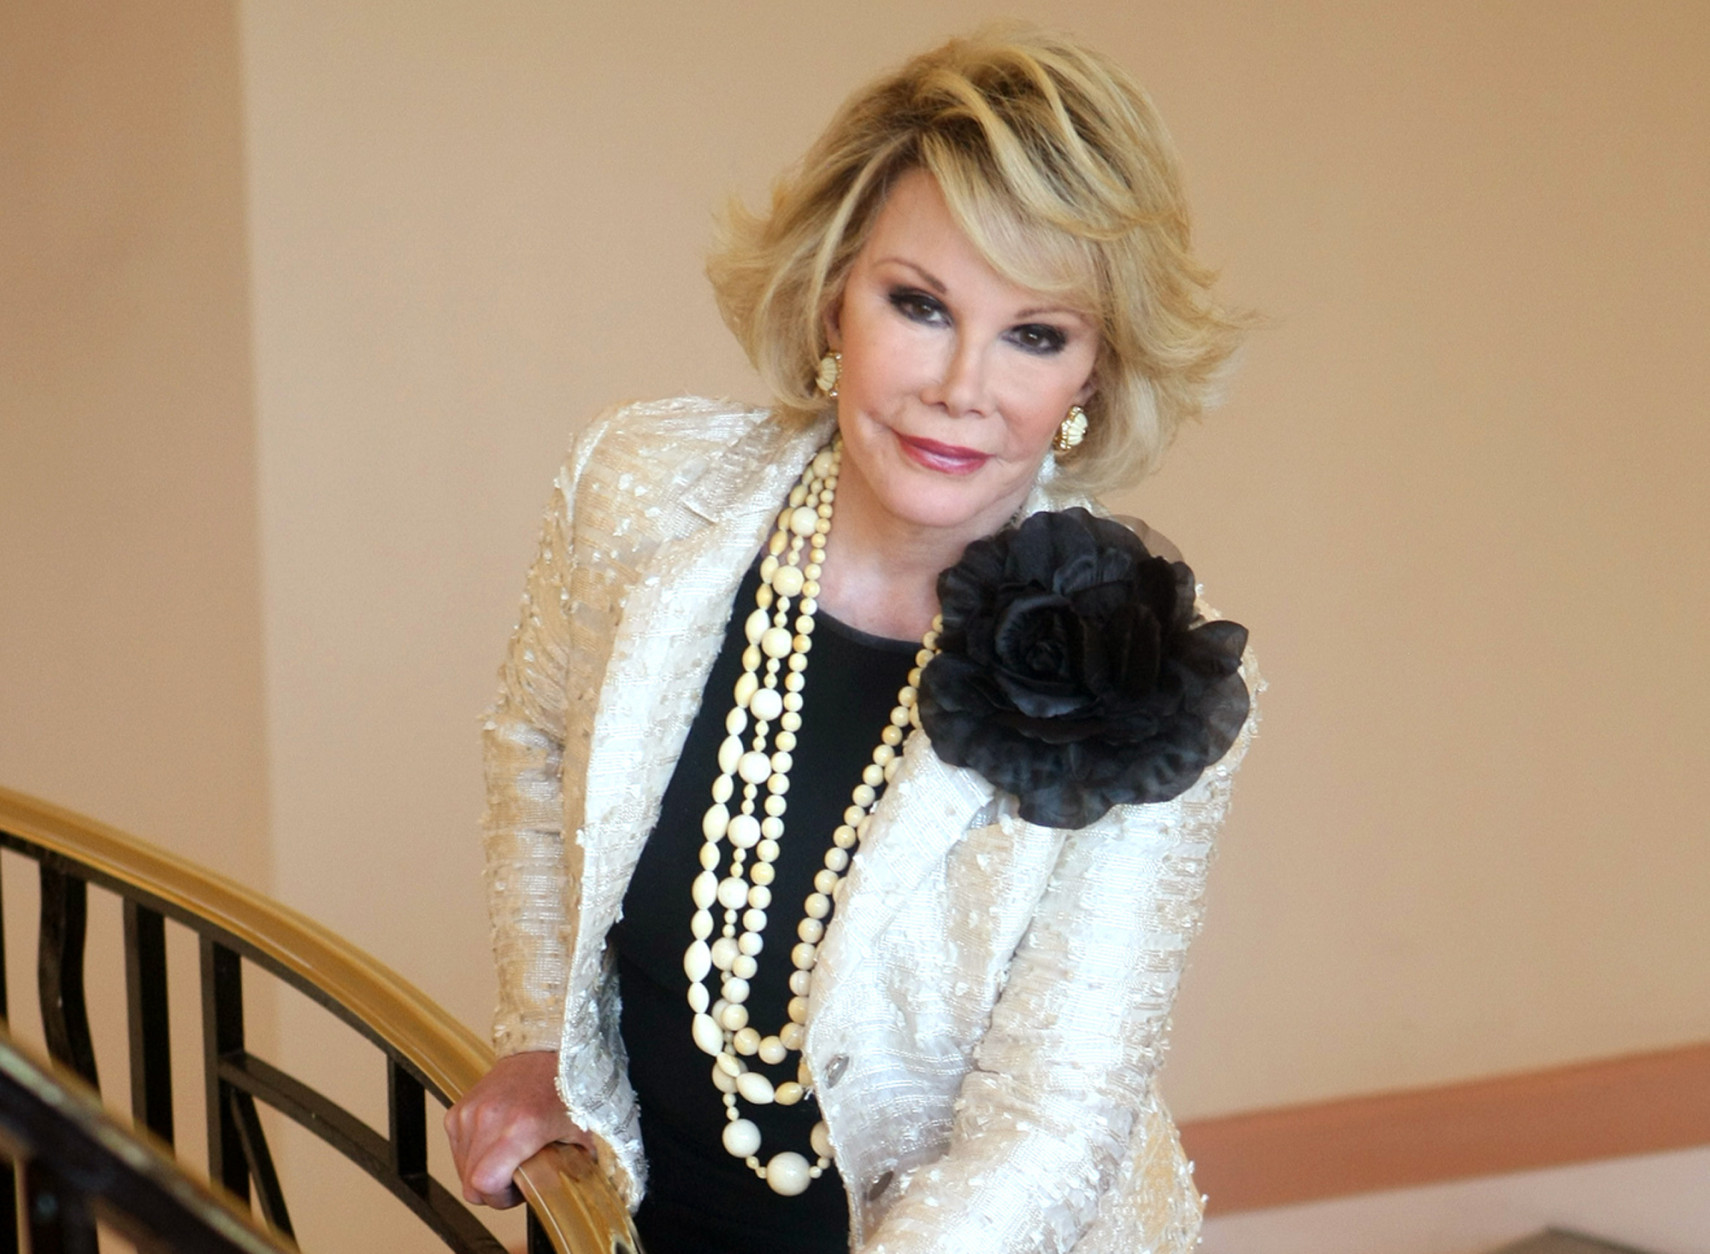 FILE - This Oct. 5, 2009, file photo shows Joan Rivers posing as she presents "Comedy Roast with Joan Rivers " during the 25th MIPCOM (International Film and Programme Market for TV, Video, Cable and Satellite) in Cannes, southeastern France. Rivers, the raucous, acid-tongued comedian who crashed the male-dominated realm of late-night talk shows and turned Hollywood red carpets into danger zones for badly dressed celebrities,  died Sept. 4, 2014.  She was 81. (AP Photo/Lionel Cironneau, File)